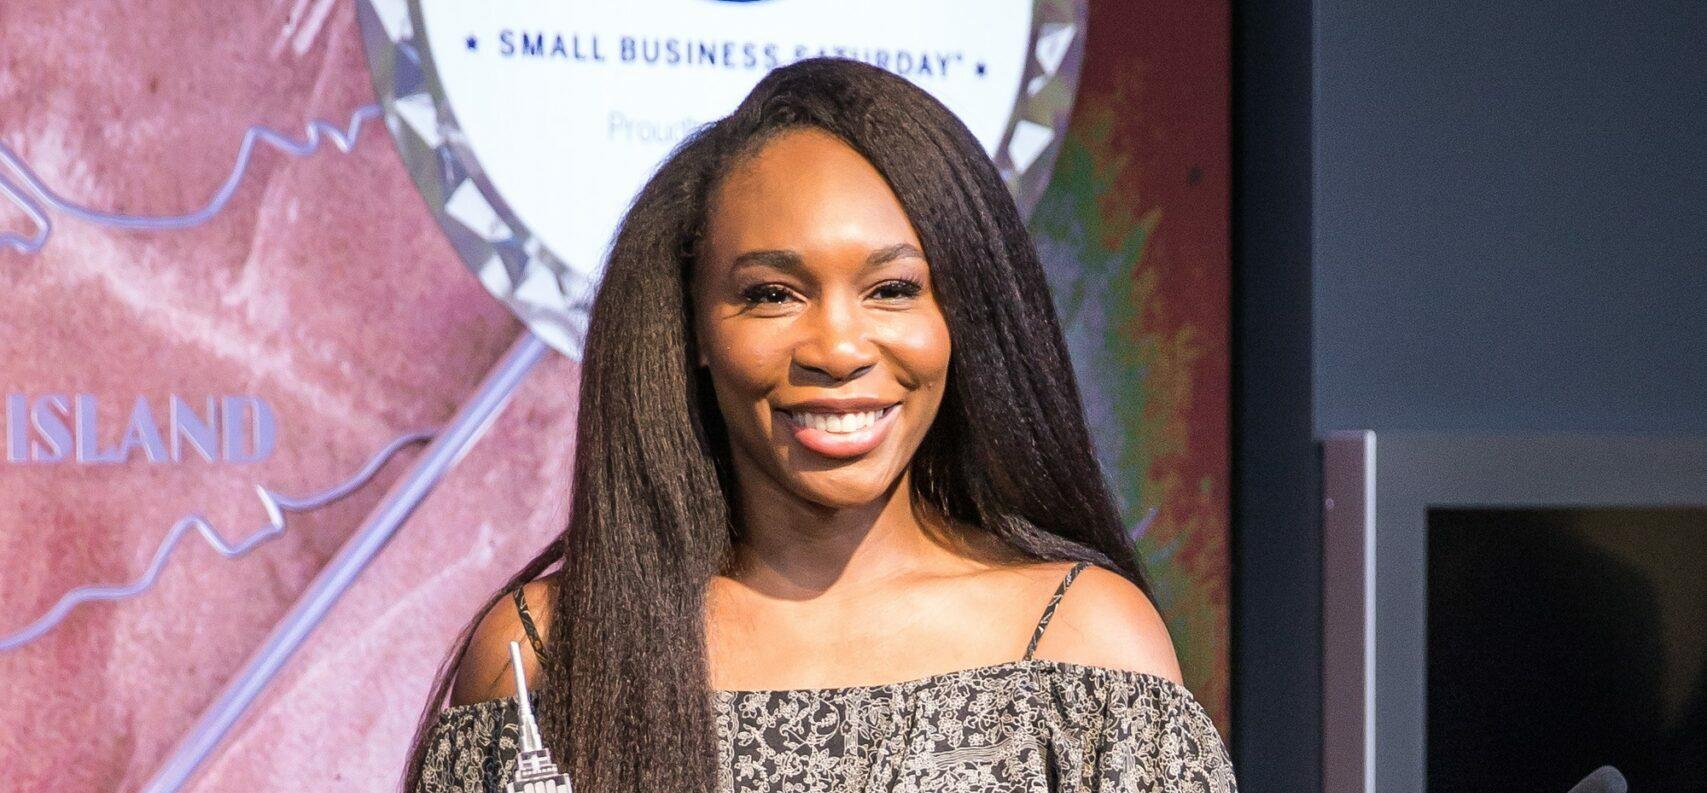 Venus Williams Gives Health Tips, Shares Her Go-To Drink To Stay Fit